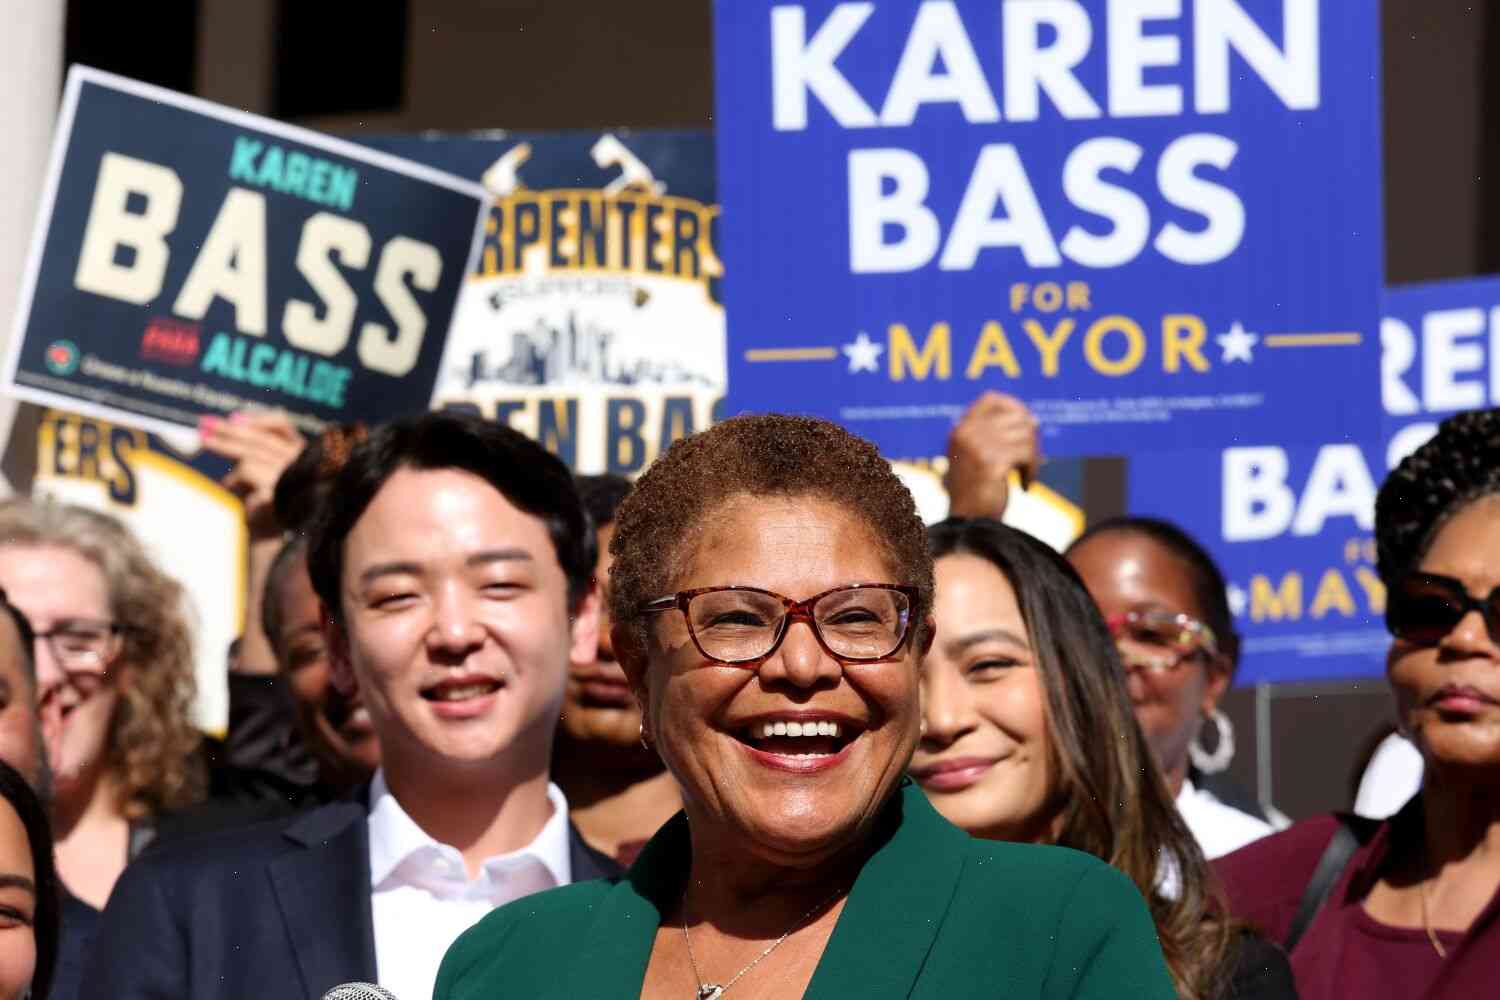 Karen Bass, 73, is the first African American woman and first female mayor-elect in Los Angeles